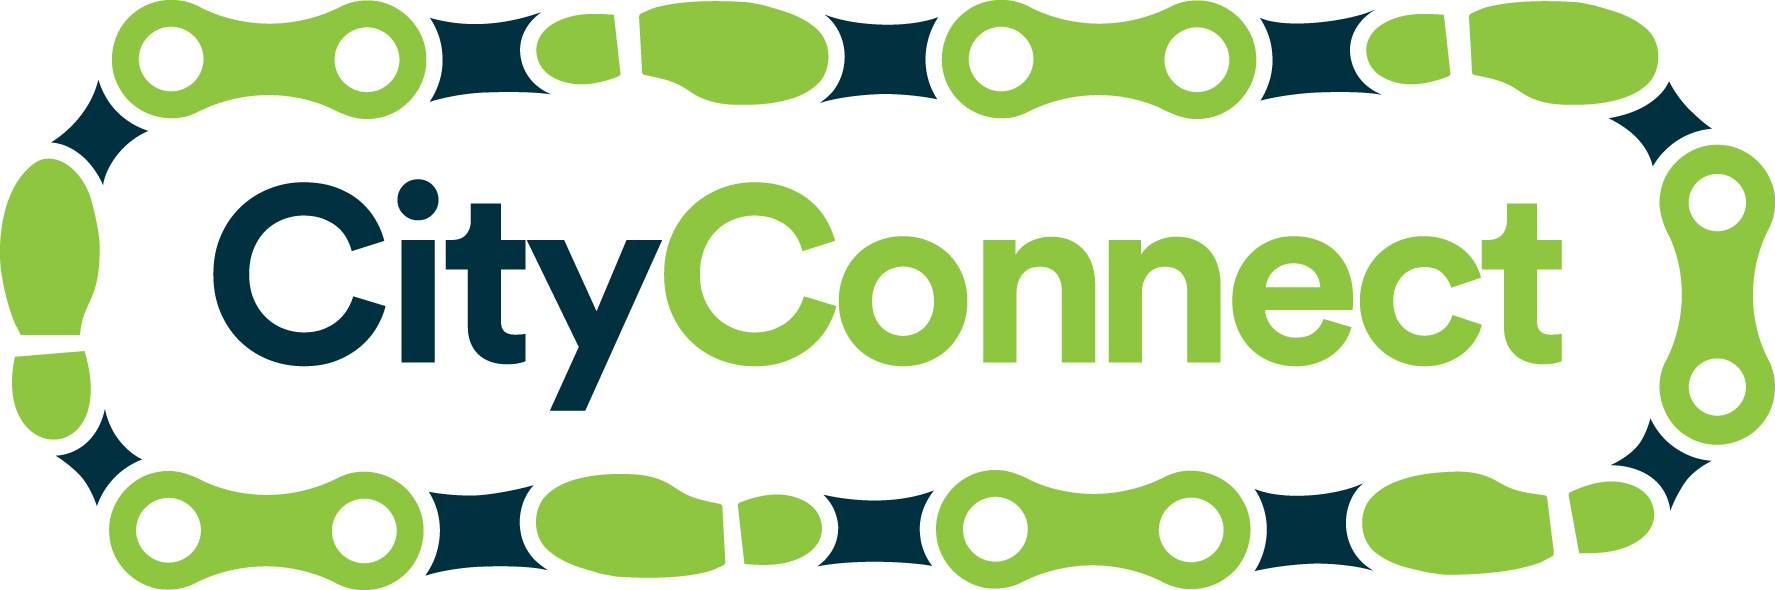 CityConnect: Enabling more people to travel by bike and on foot -  CityConnect